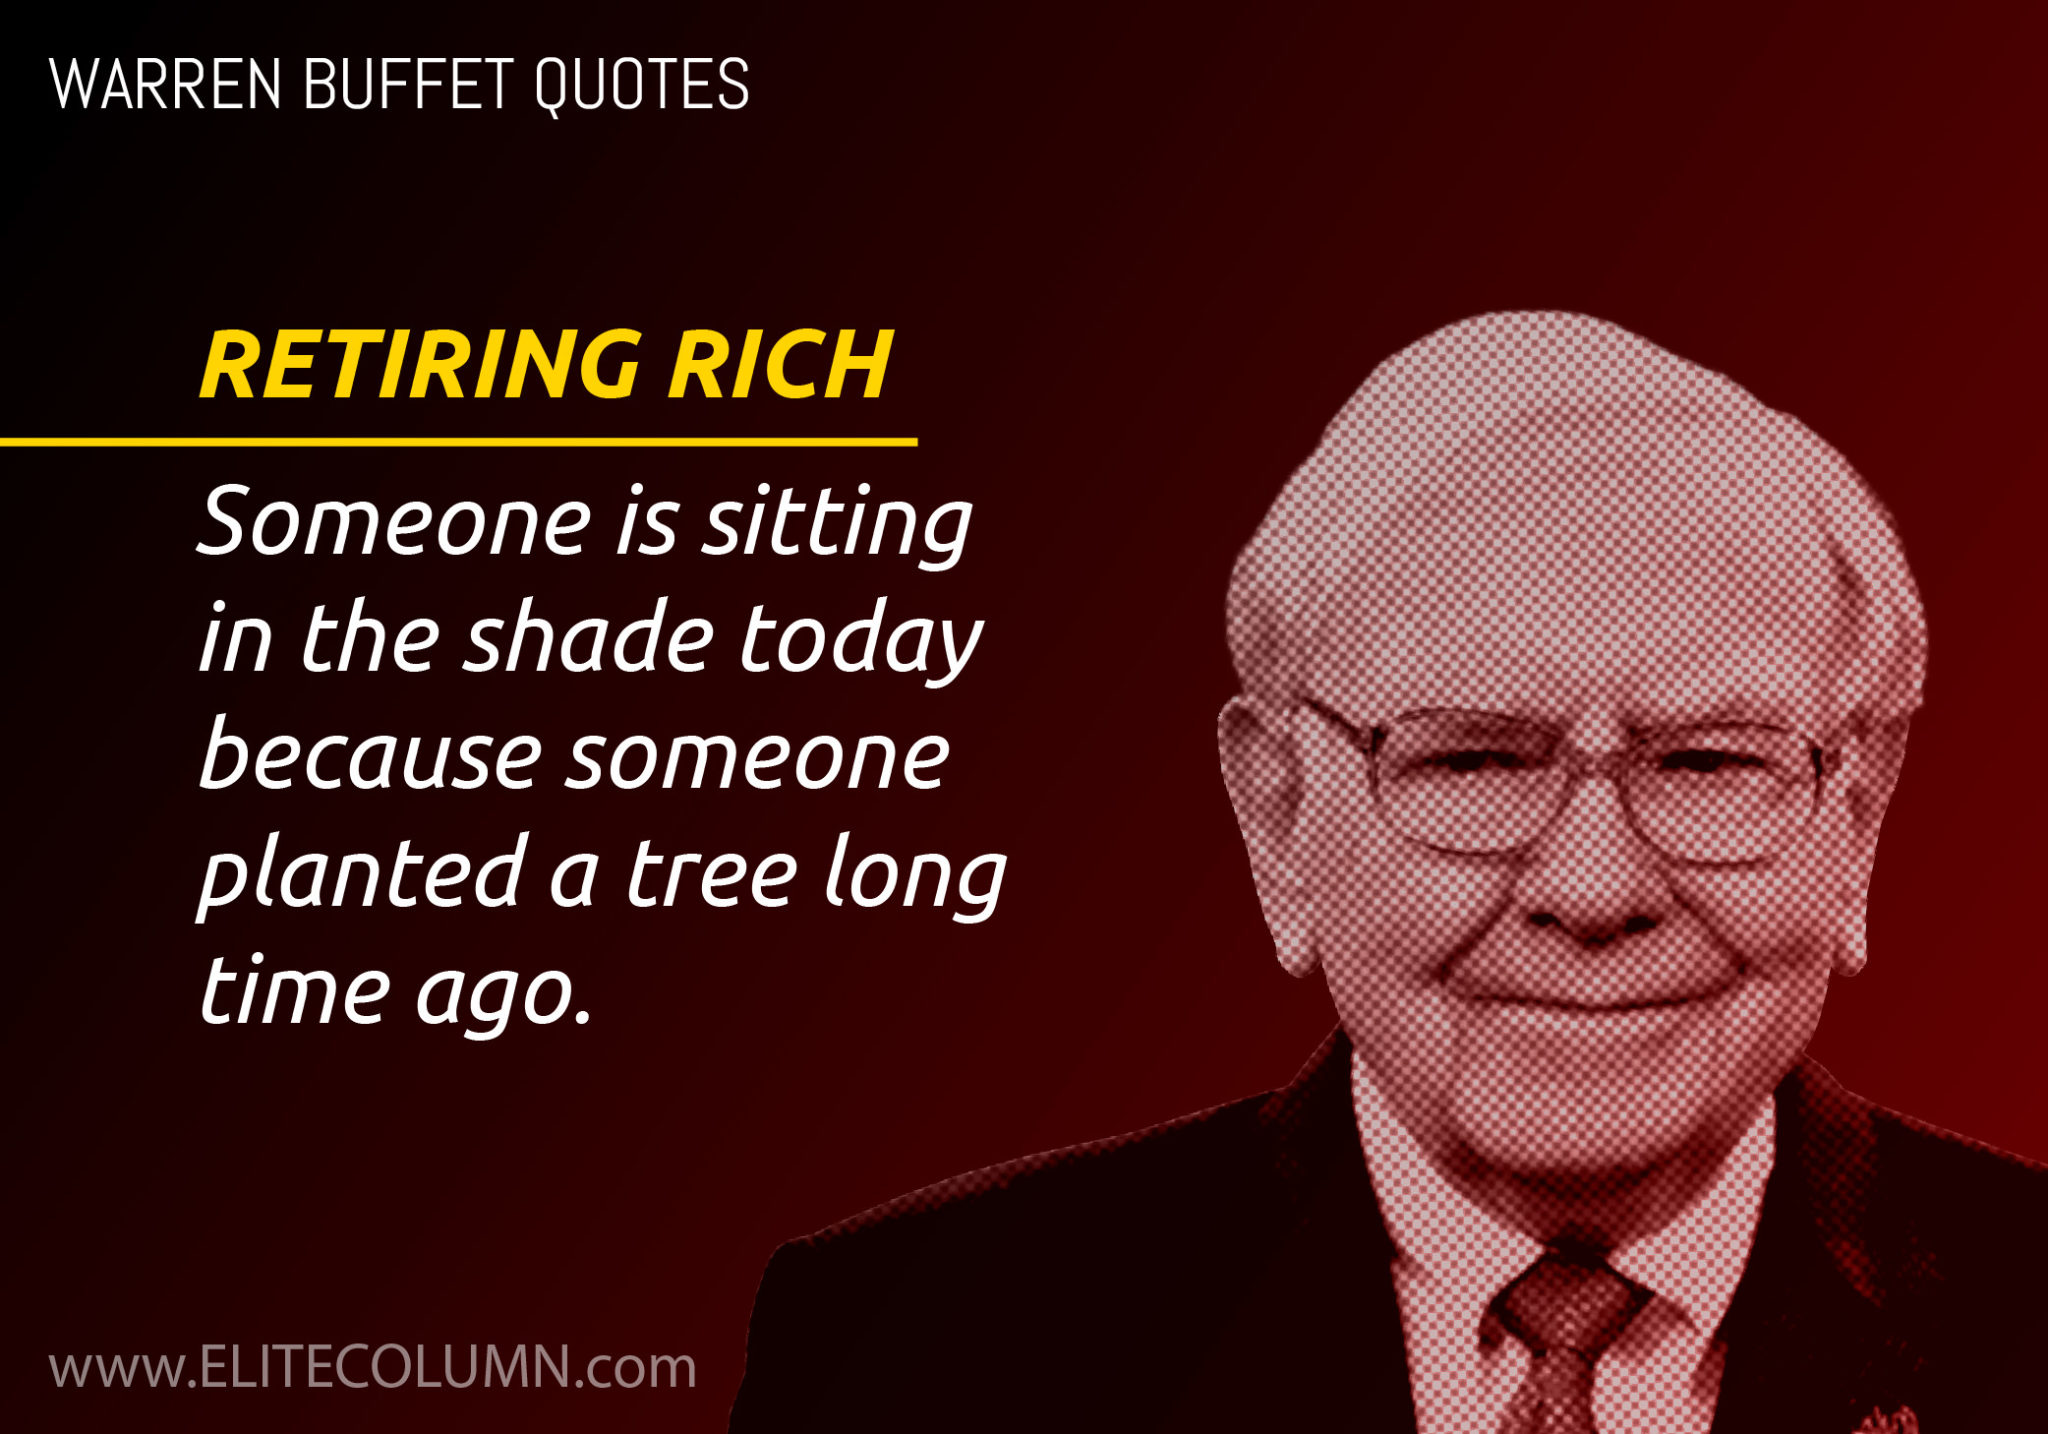 Executive mba course warren buffett and value investing conference hsbc forex trading platform